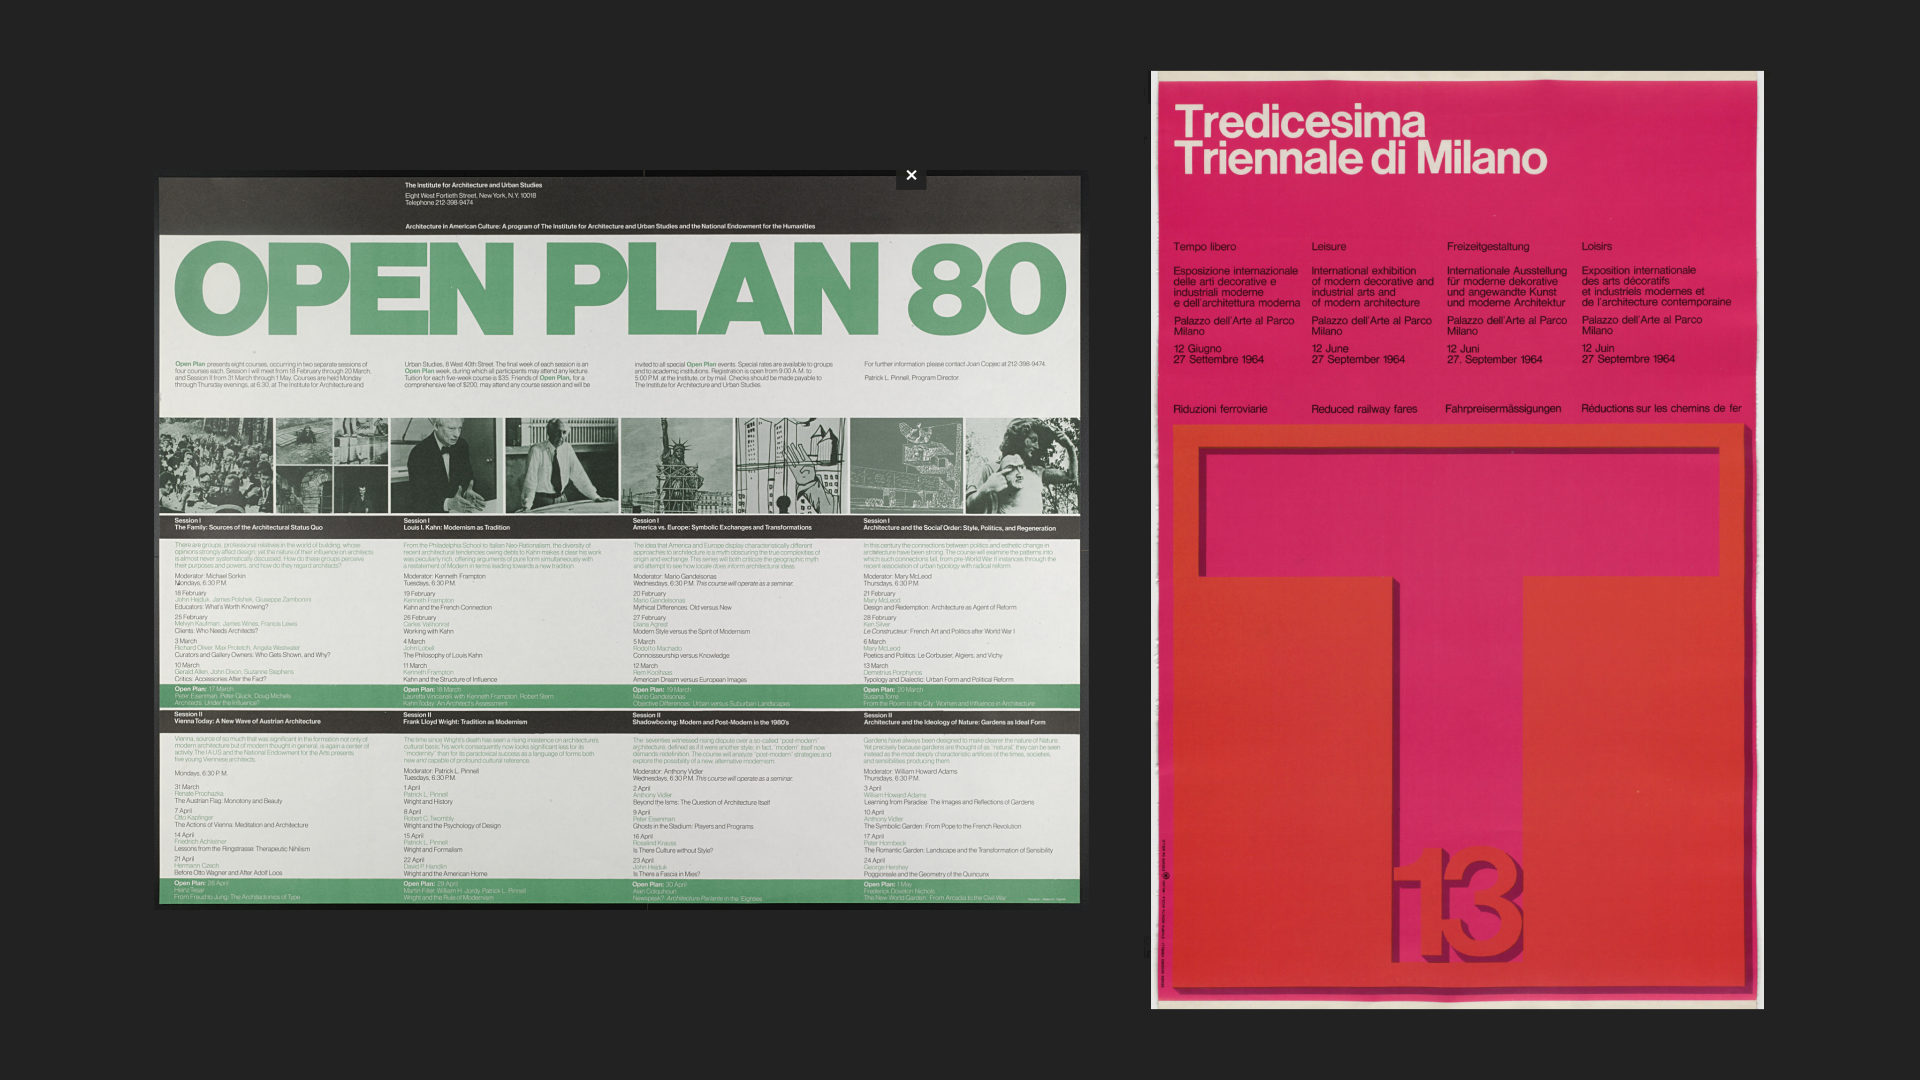 Info sheet for the Institute of Architecture and Urban Studies (1980) by Massimo Vignelli and Lella Vignelli, and exhibition poster (1964) by Massimo Vignelli, courtesy MOMA.